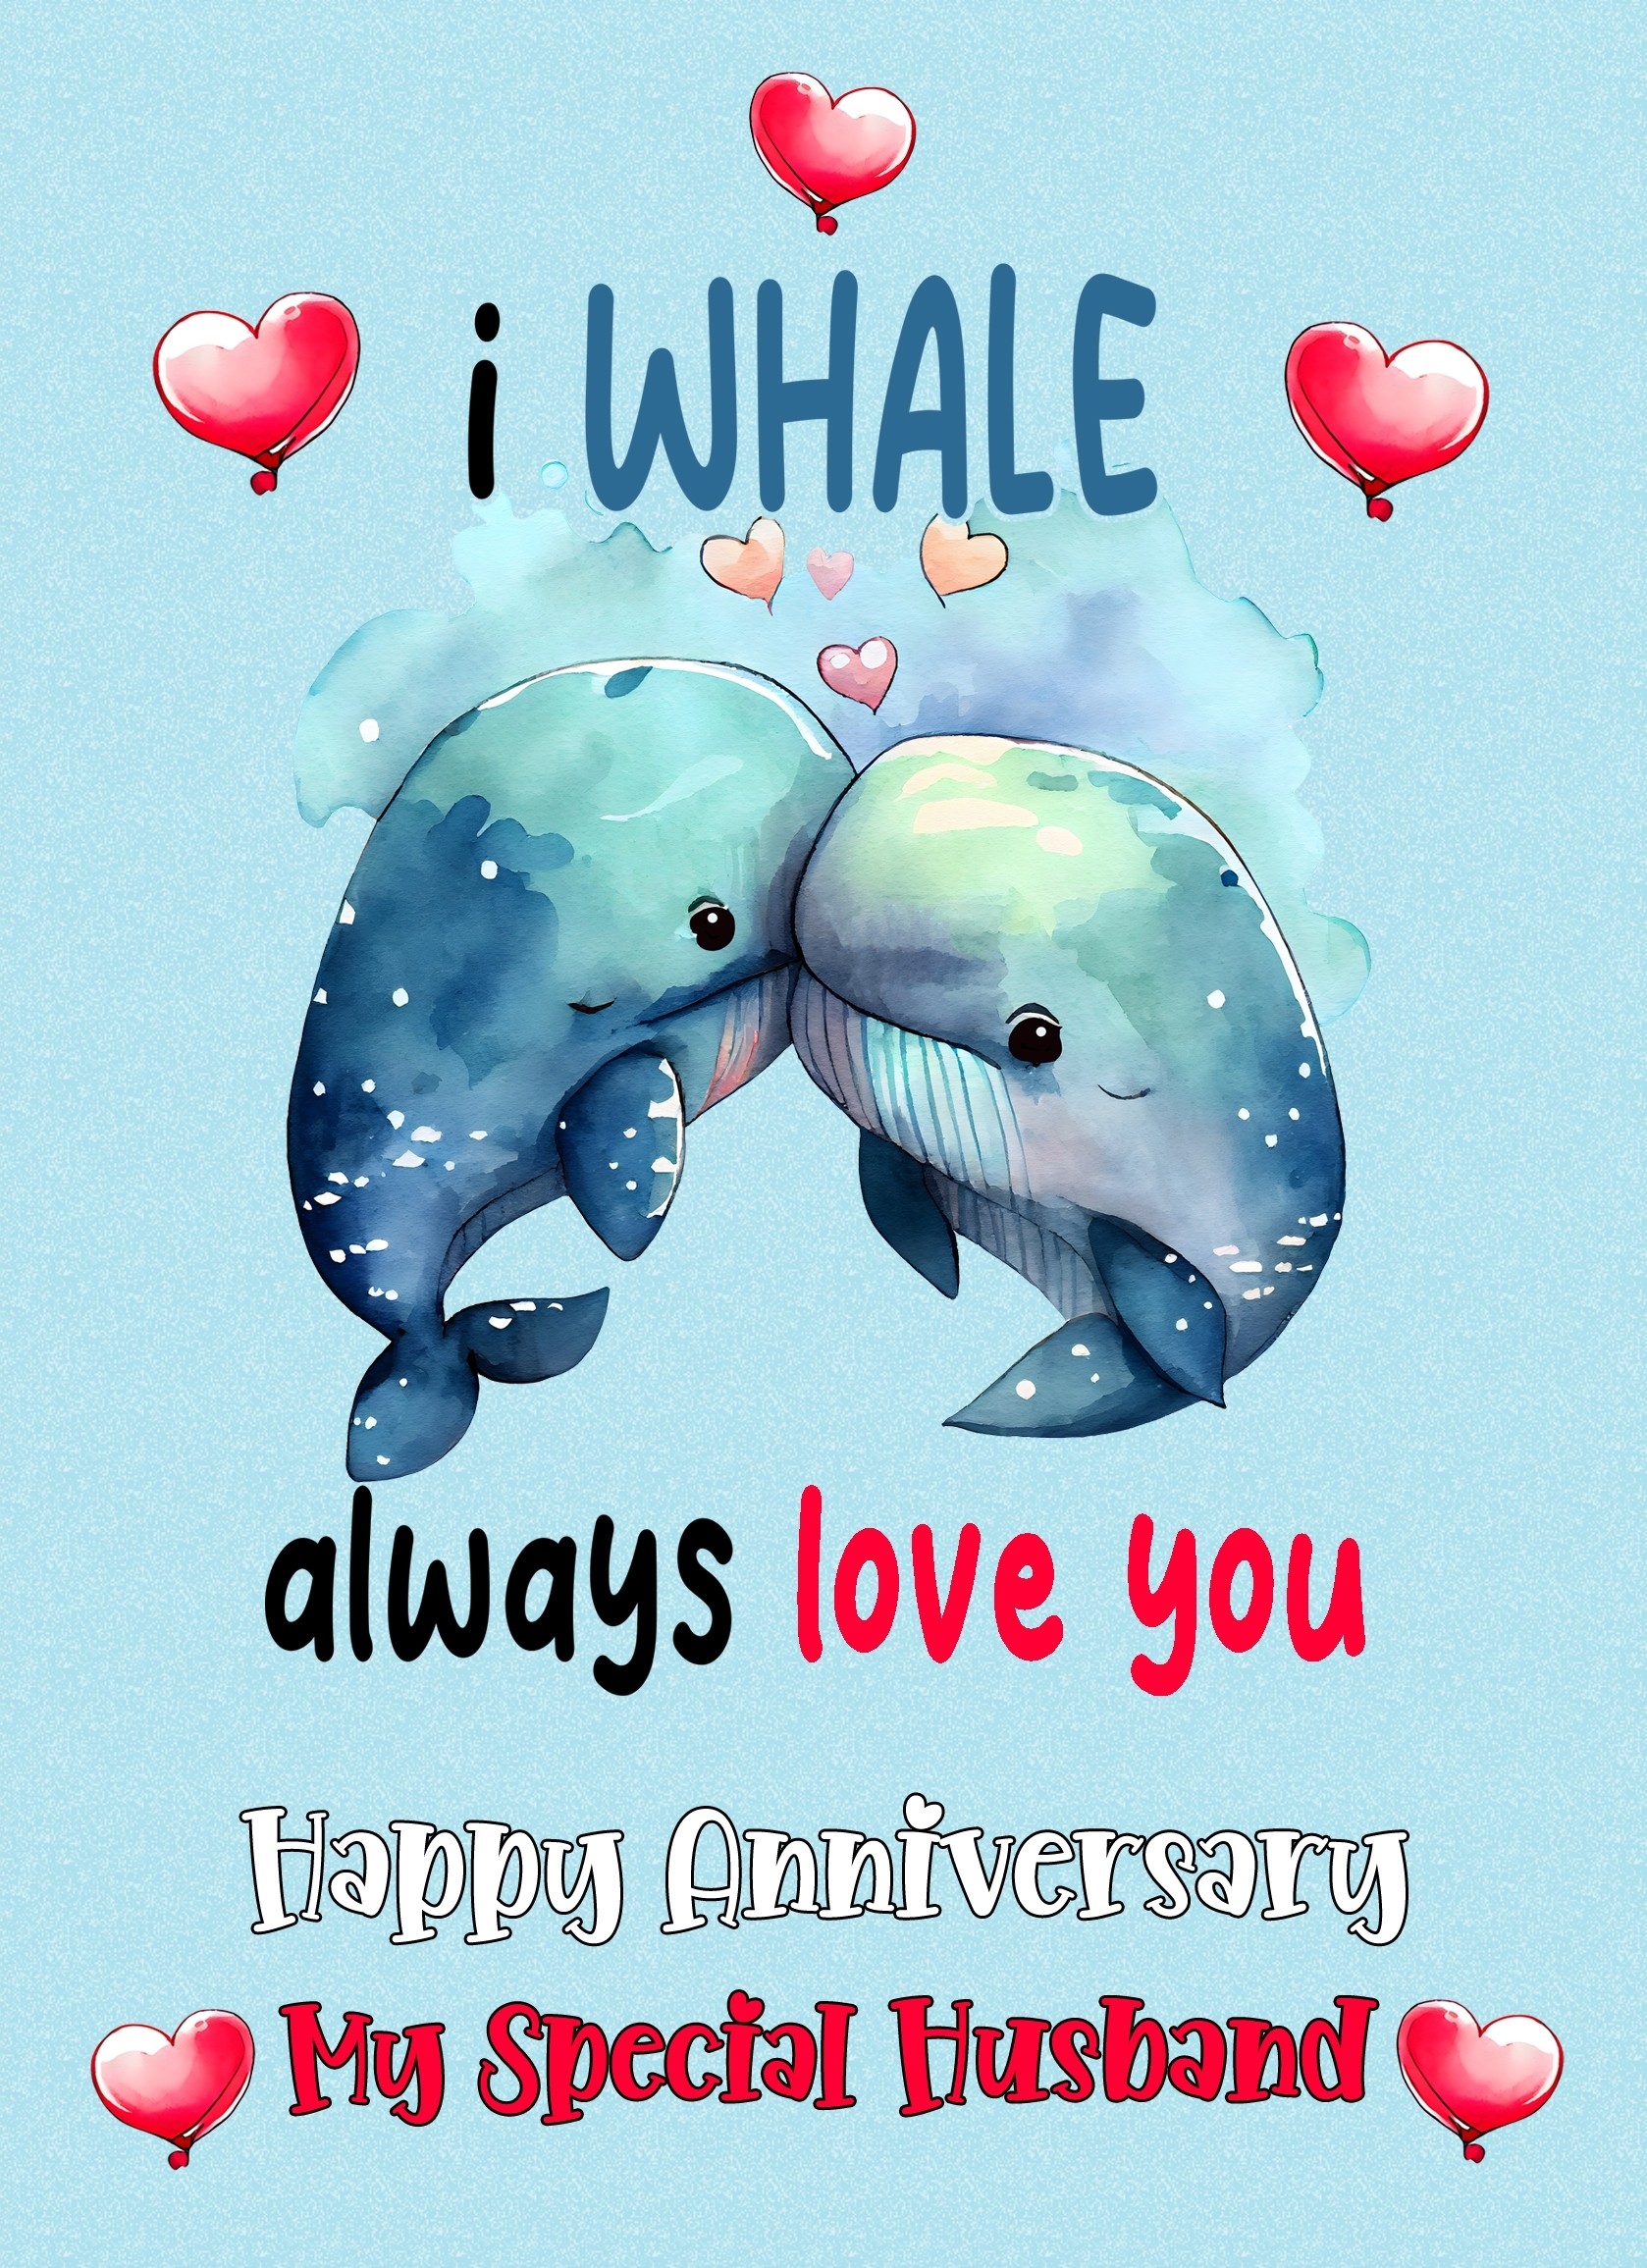 Funny Pun Romantic Anniversary Card for Husband (Whale)